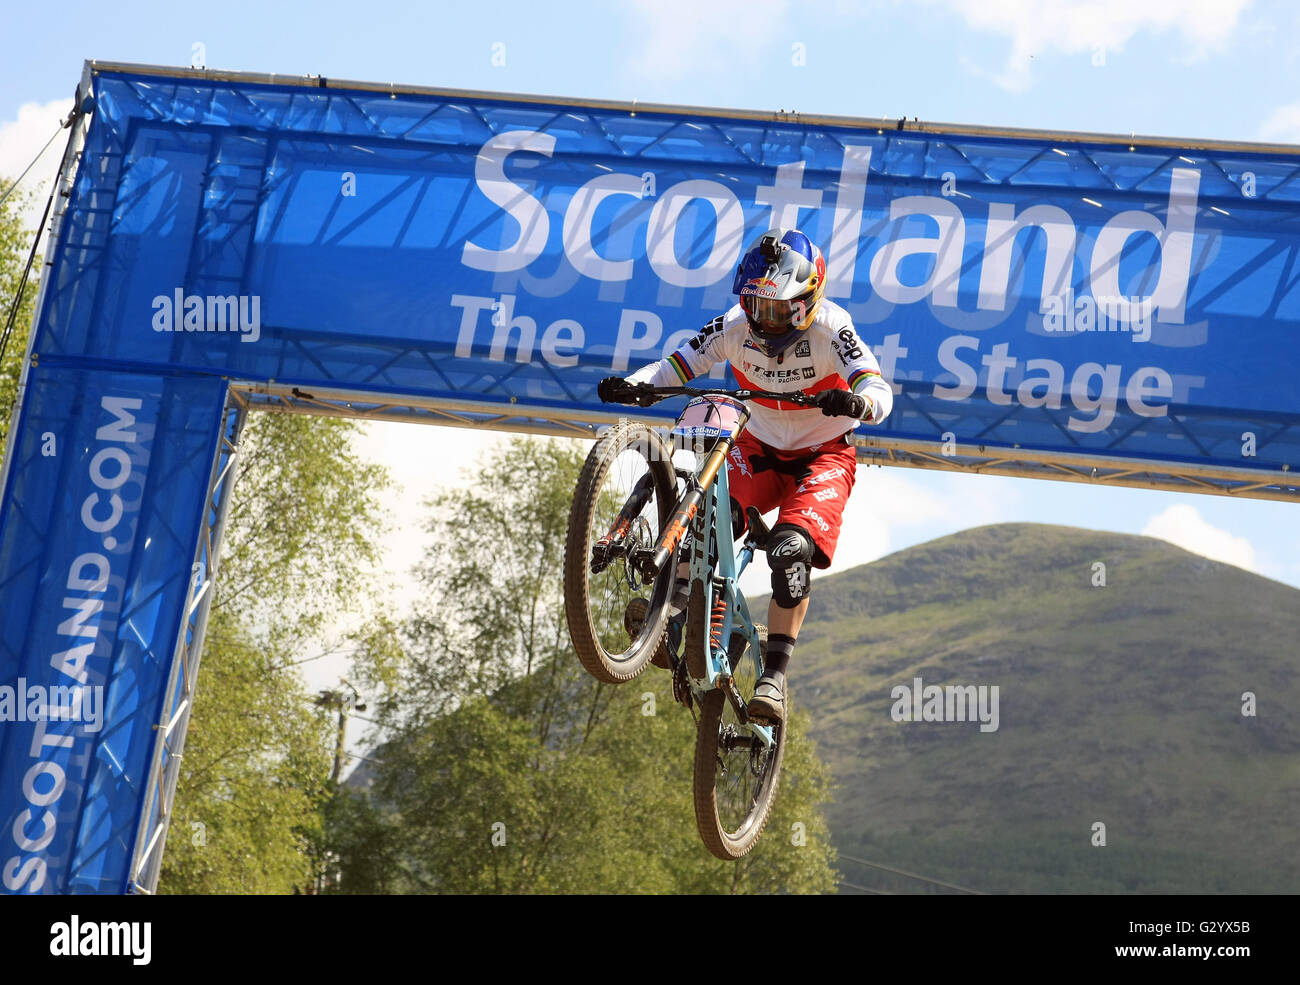 Winner Rachel Atherton jumping through the Scotland Arch on her way to winning the Mountian Bike World Cup at Fort William June 5th 2016. Stock Photo